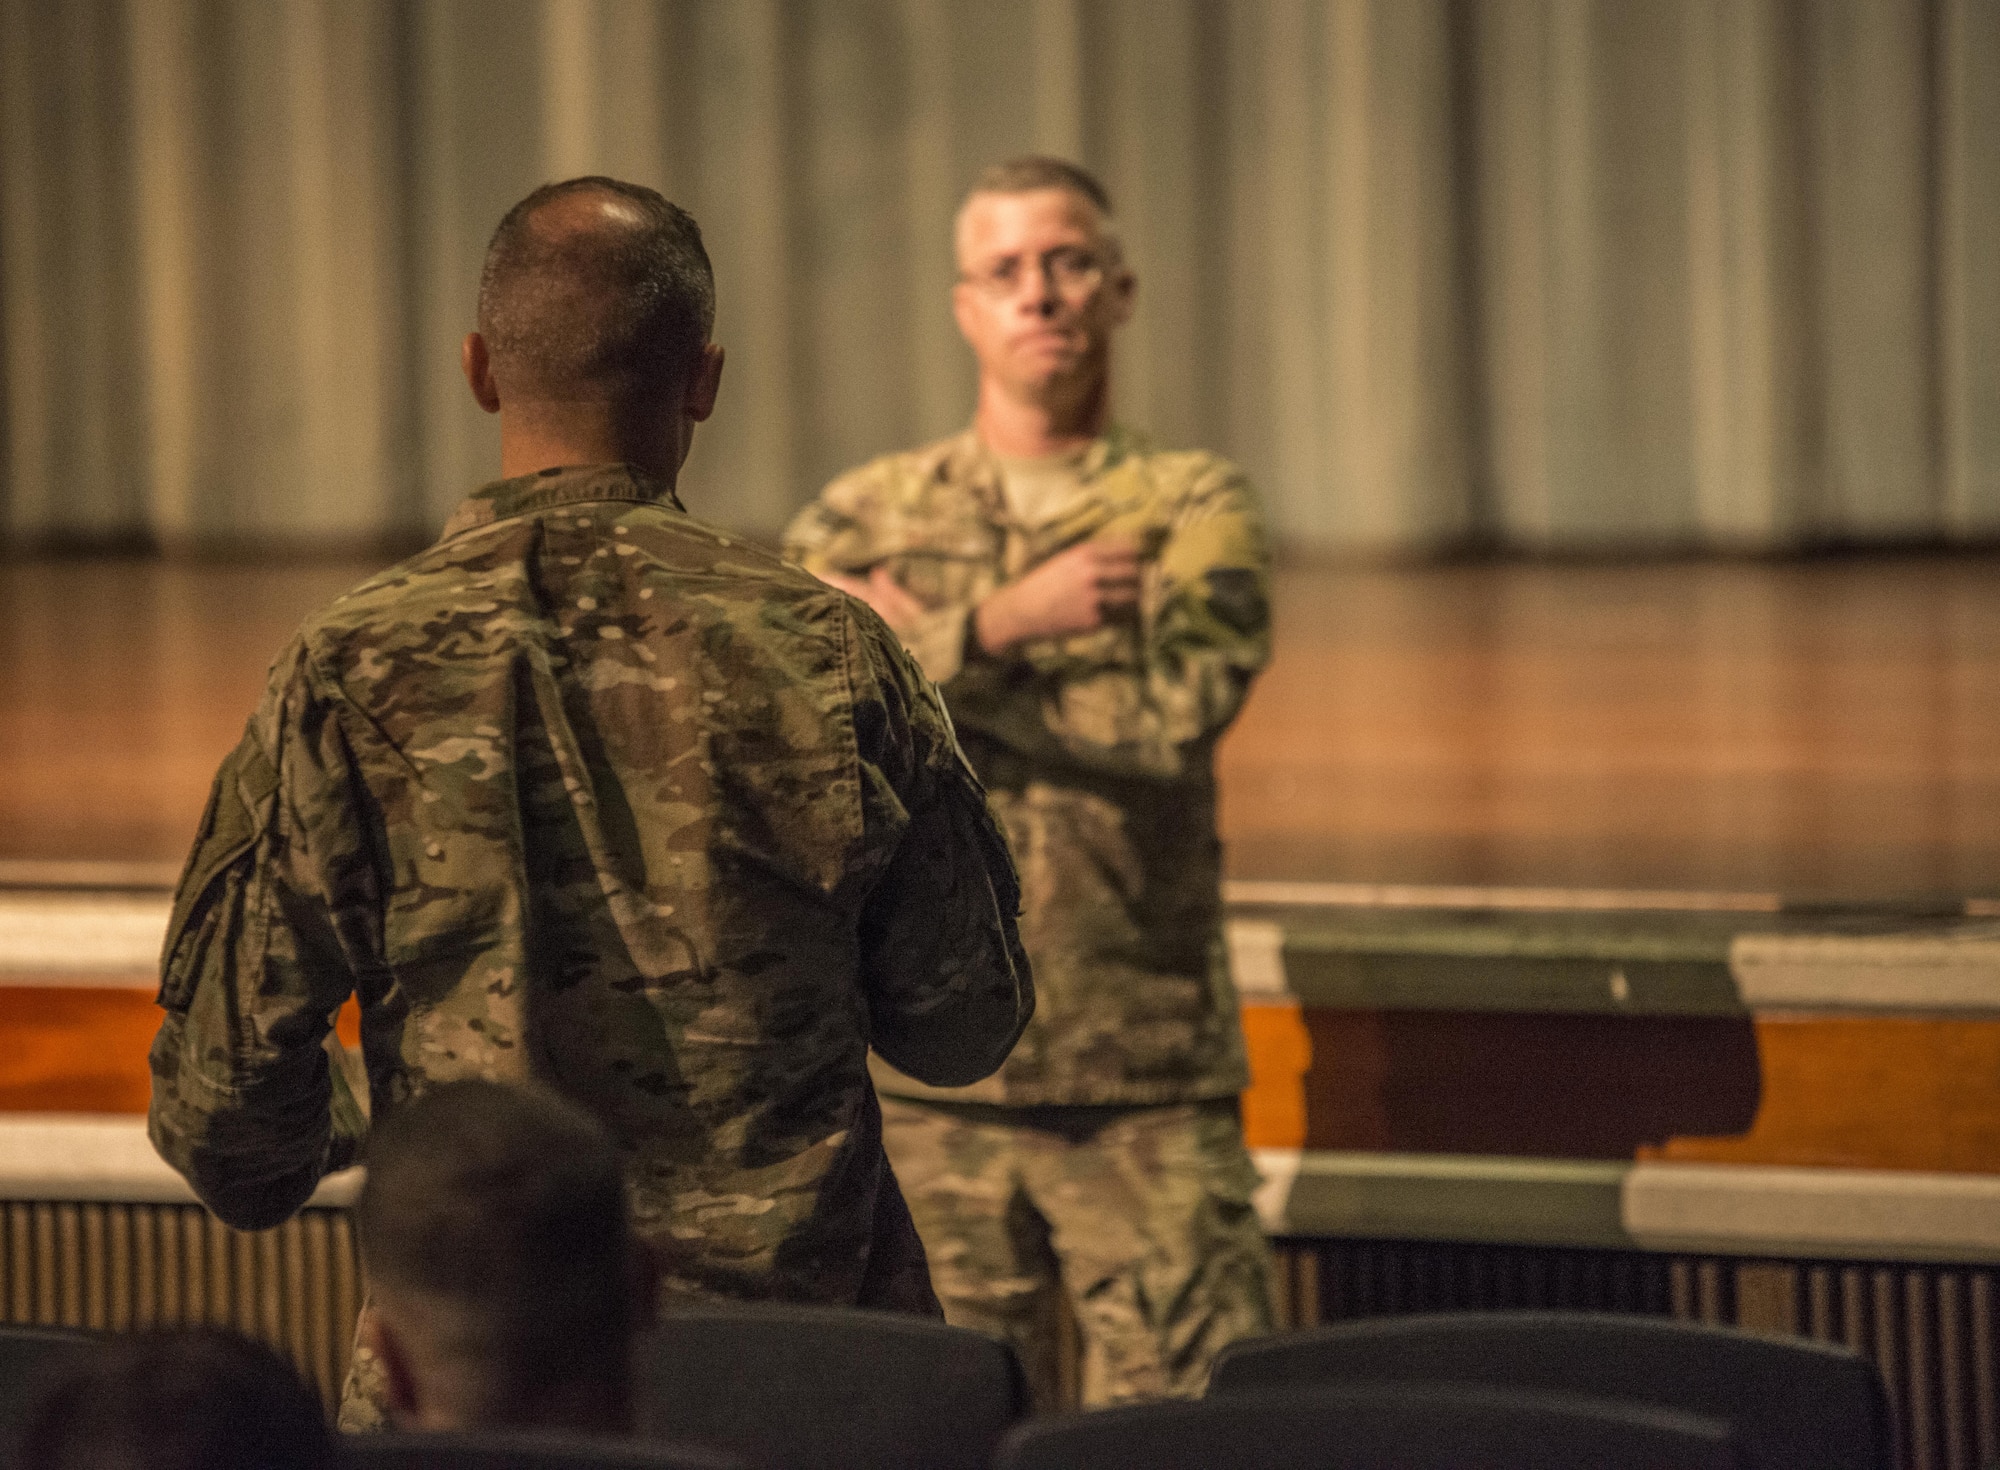 Air Force Special Operations Command Chief Master Sgt. Gregory Smith addresses the enlisted members of the 353rd Special Operations Group during an all-call June 19, 2017 at Kadena Air Base, Okinawa, Japan. Airmen were invited to ask questions at the conclusion of the all-call. (U.S. Air Force photo by Capt. Jessica Tait)